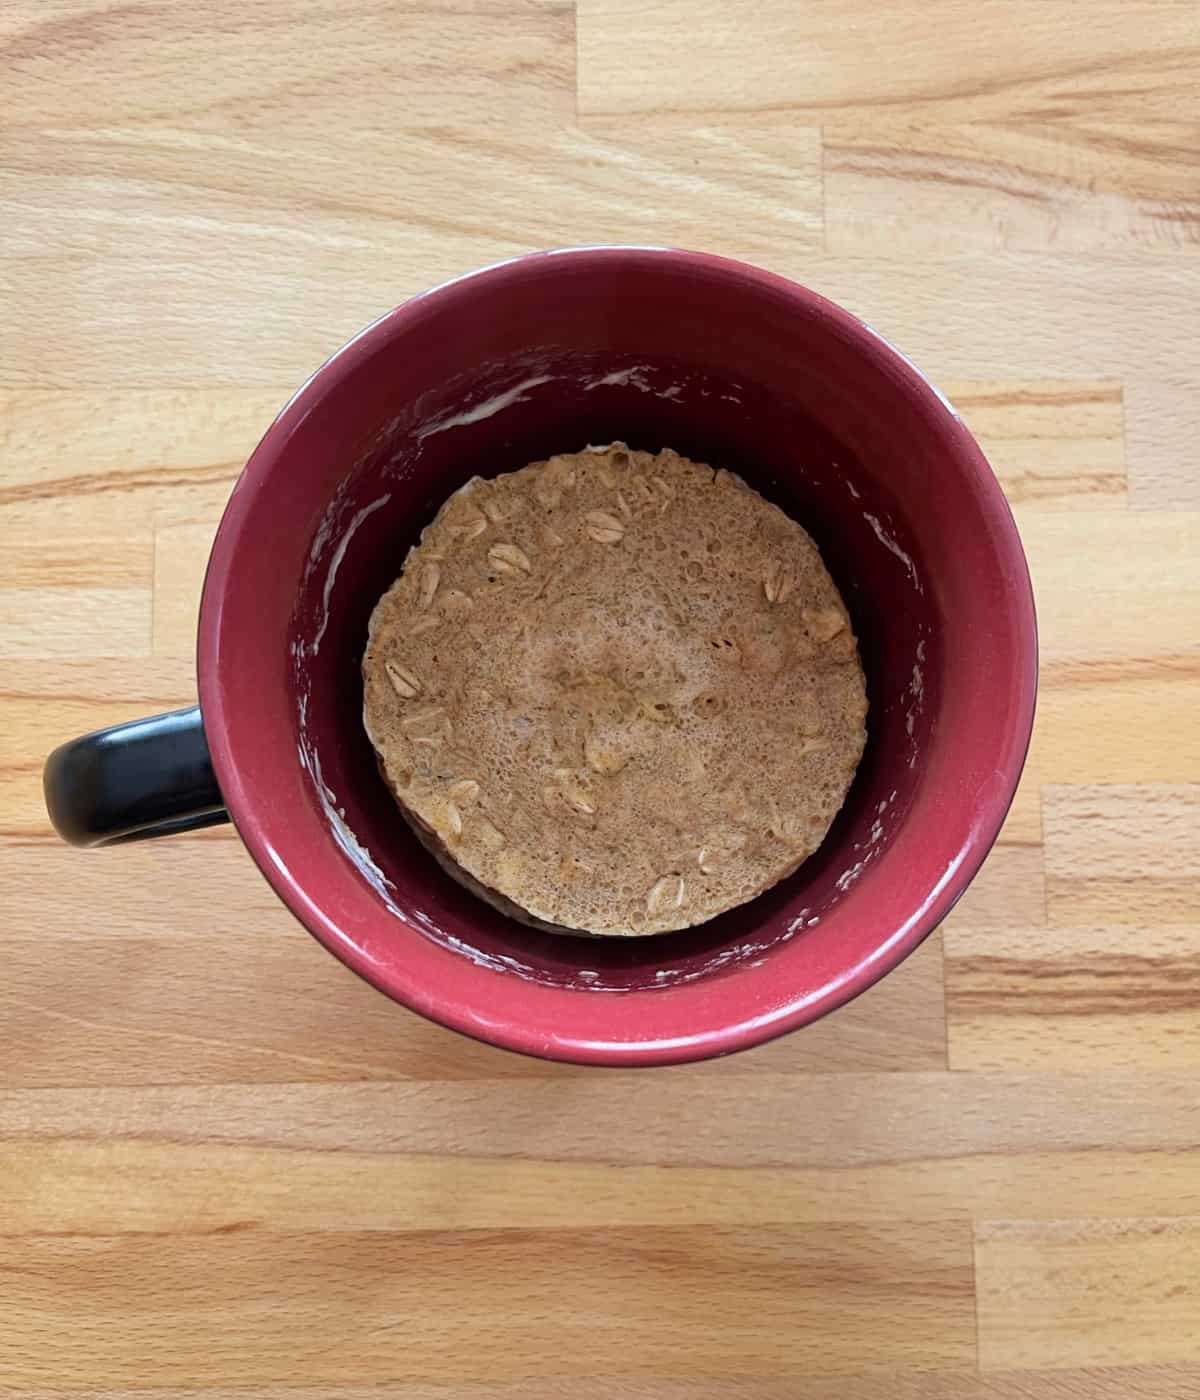 Oatmeal raisin muffin cooling in red mug on wooden table.